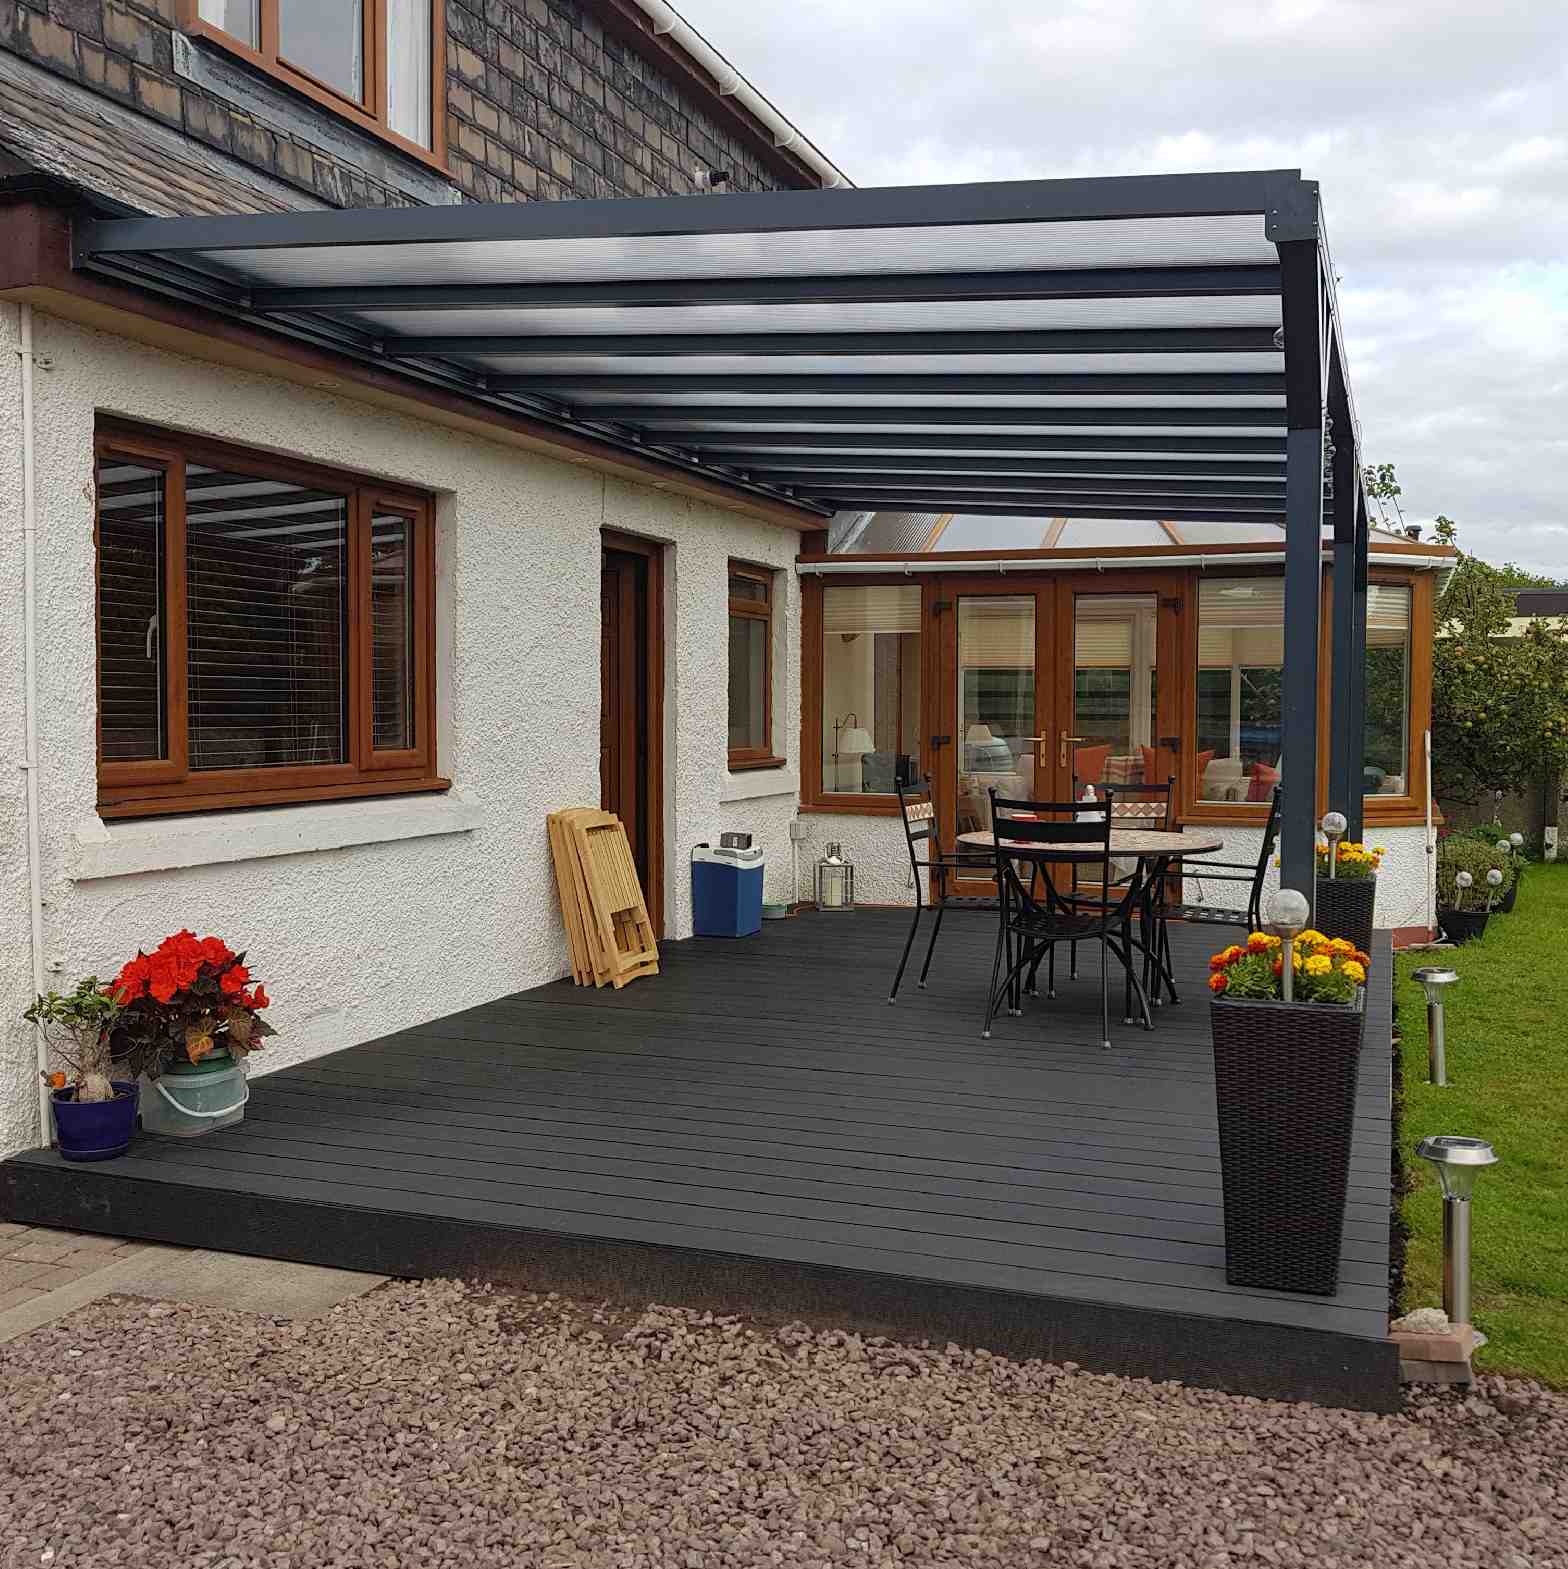 Buy Omega Verandah, Anthracite Grey, 16mm Polycarbonate Glazing - 7.0m (W) x 4.5m (P), (4) Supporting Posts online today